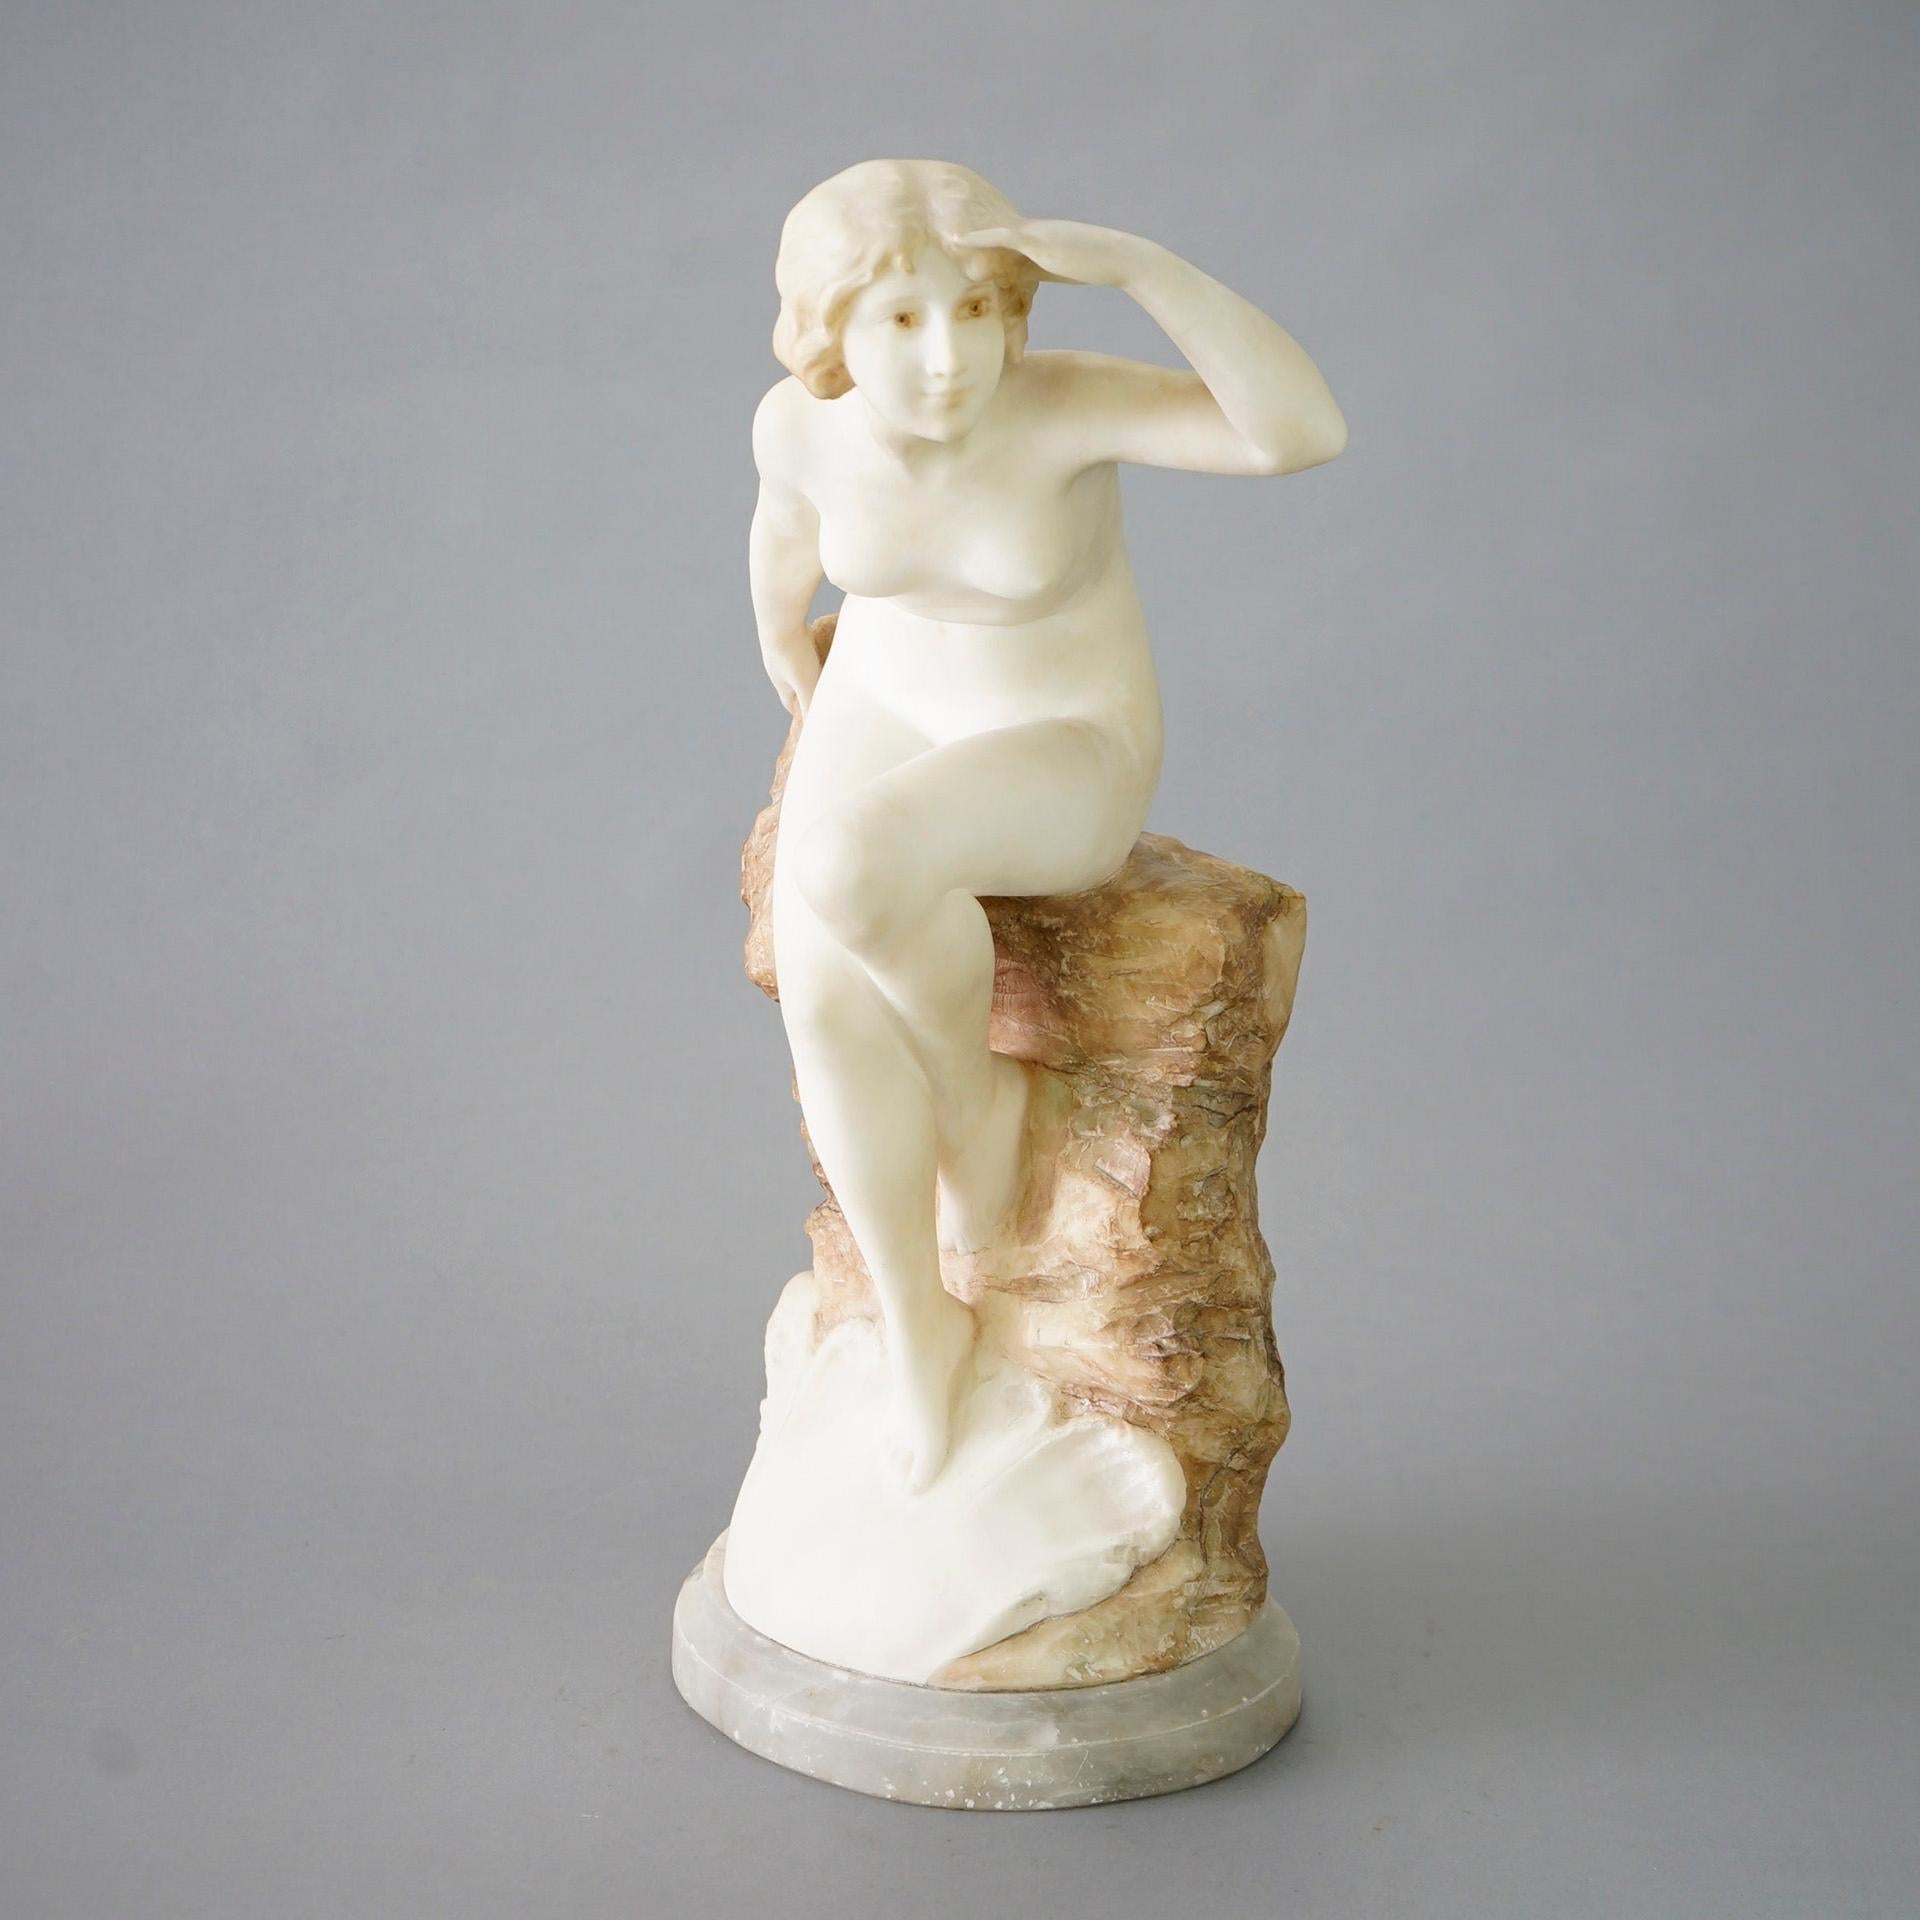 An antique Italian sculpture by A. Del Perugia (Italy, circa 1900) offers carved alabaster portrait of a nude woman seated on a rock over seashore with waves, artist signed as photographed, early 20th century

Measures- 21.75''H x 11.25''W x 8''D.